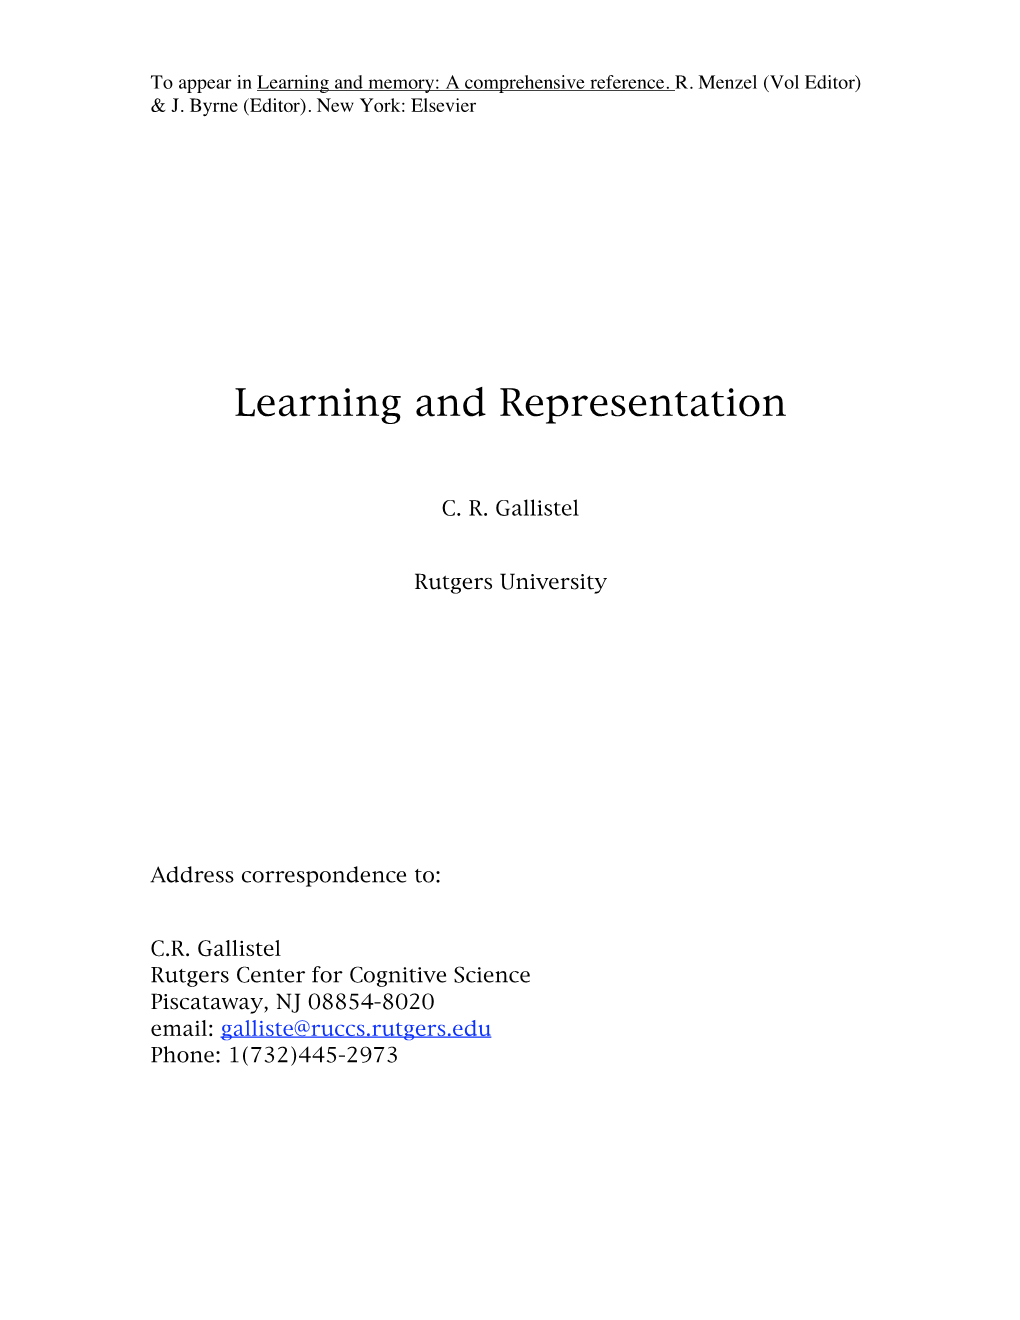 Learning and Representation